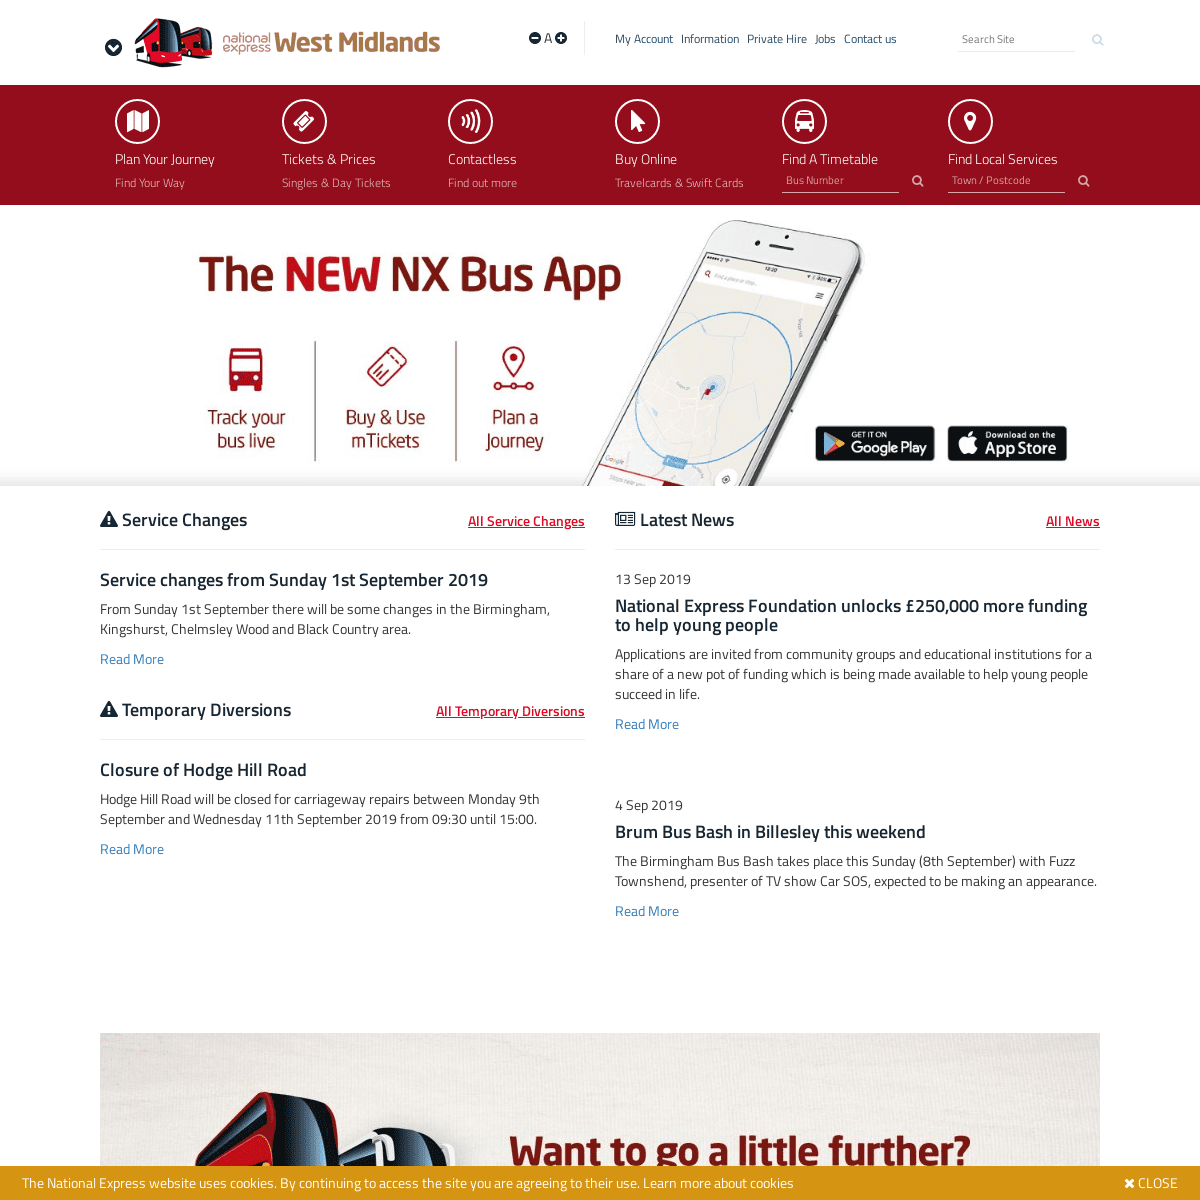 A complete backup of nxbus.co.uk